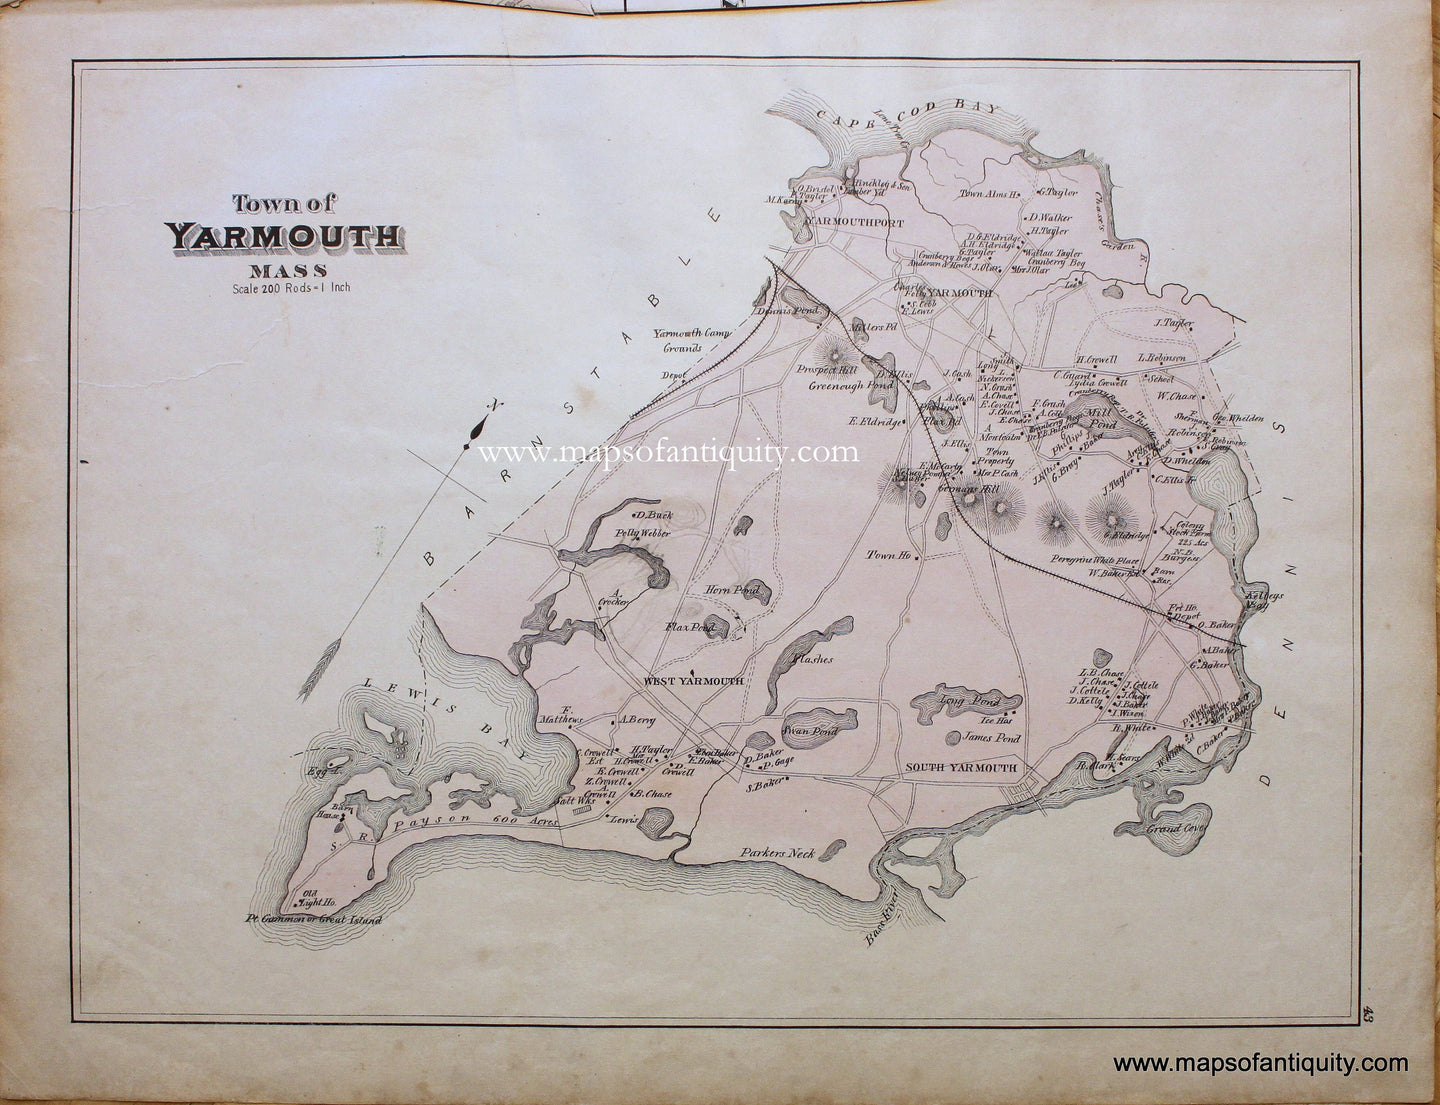 Antique-Hand-Colored-Map-Town-of-Yarmouth-p.-43-(MA)-Massachusetts-Cape-Cod-and-Islands-1880-Walker-Maps-Of-Antiquity